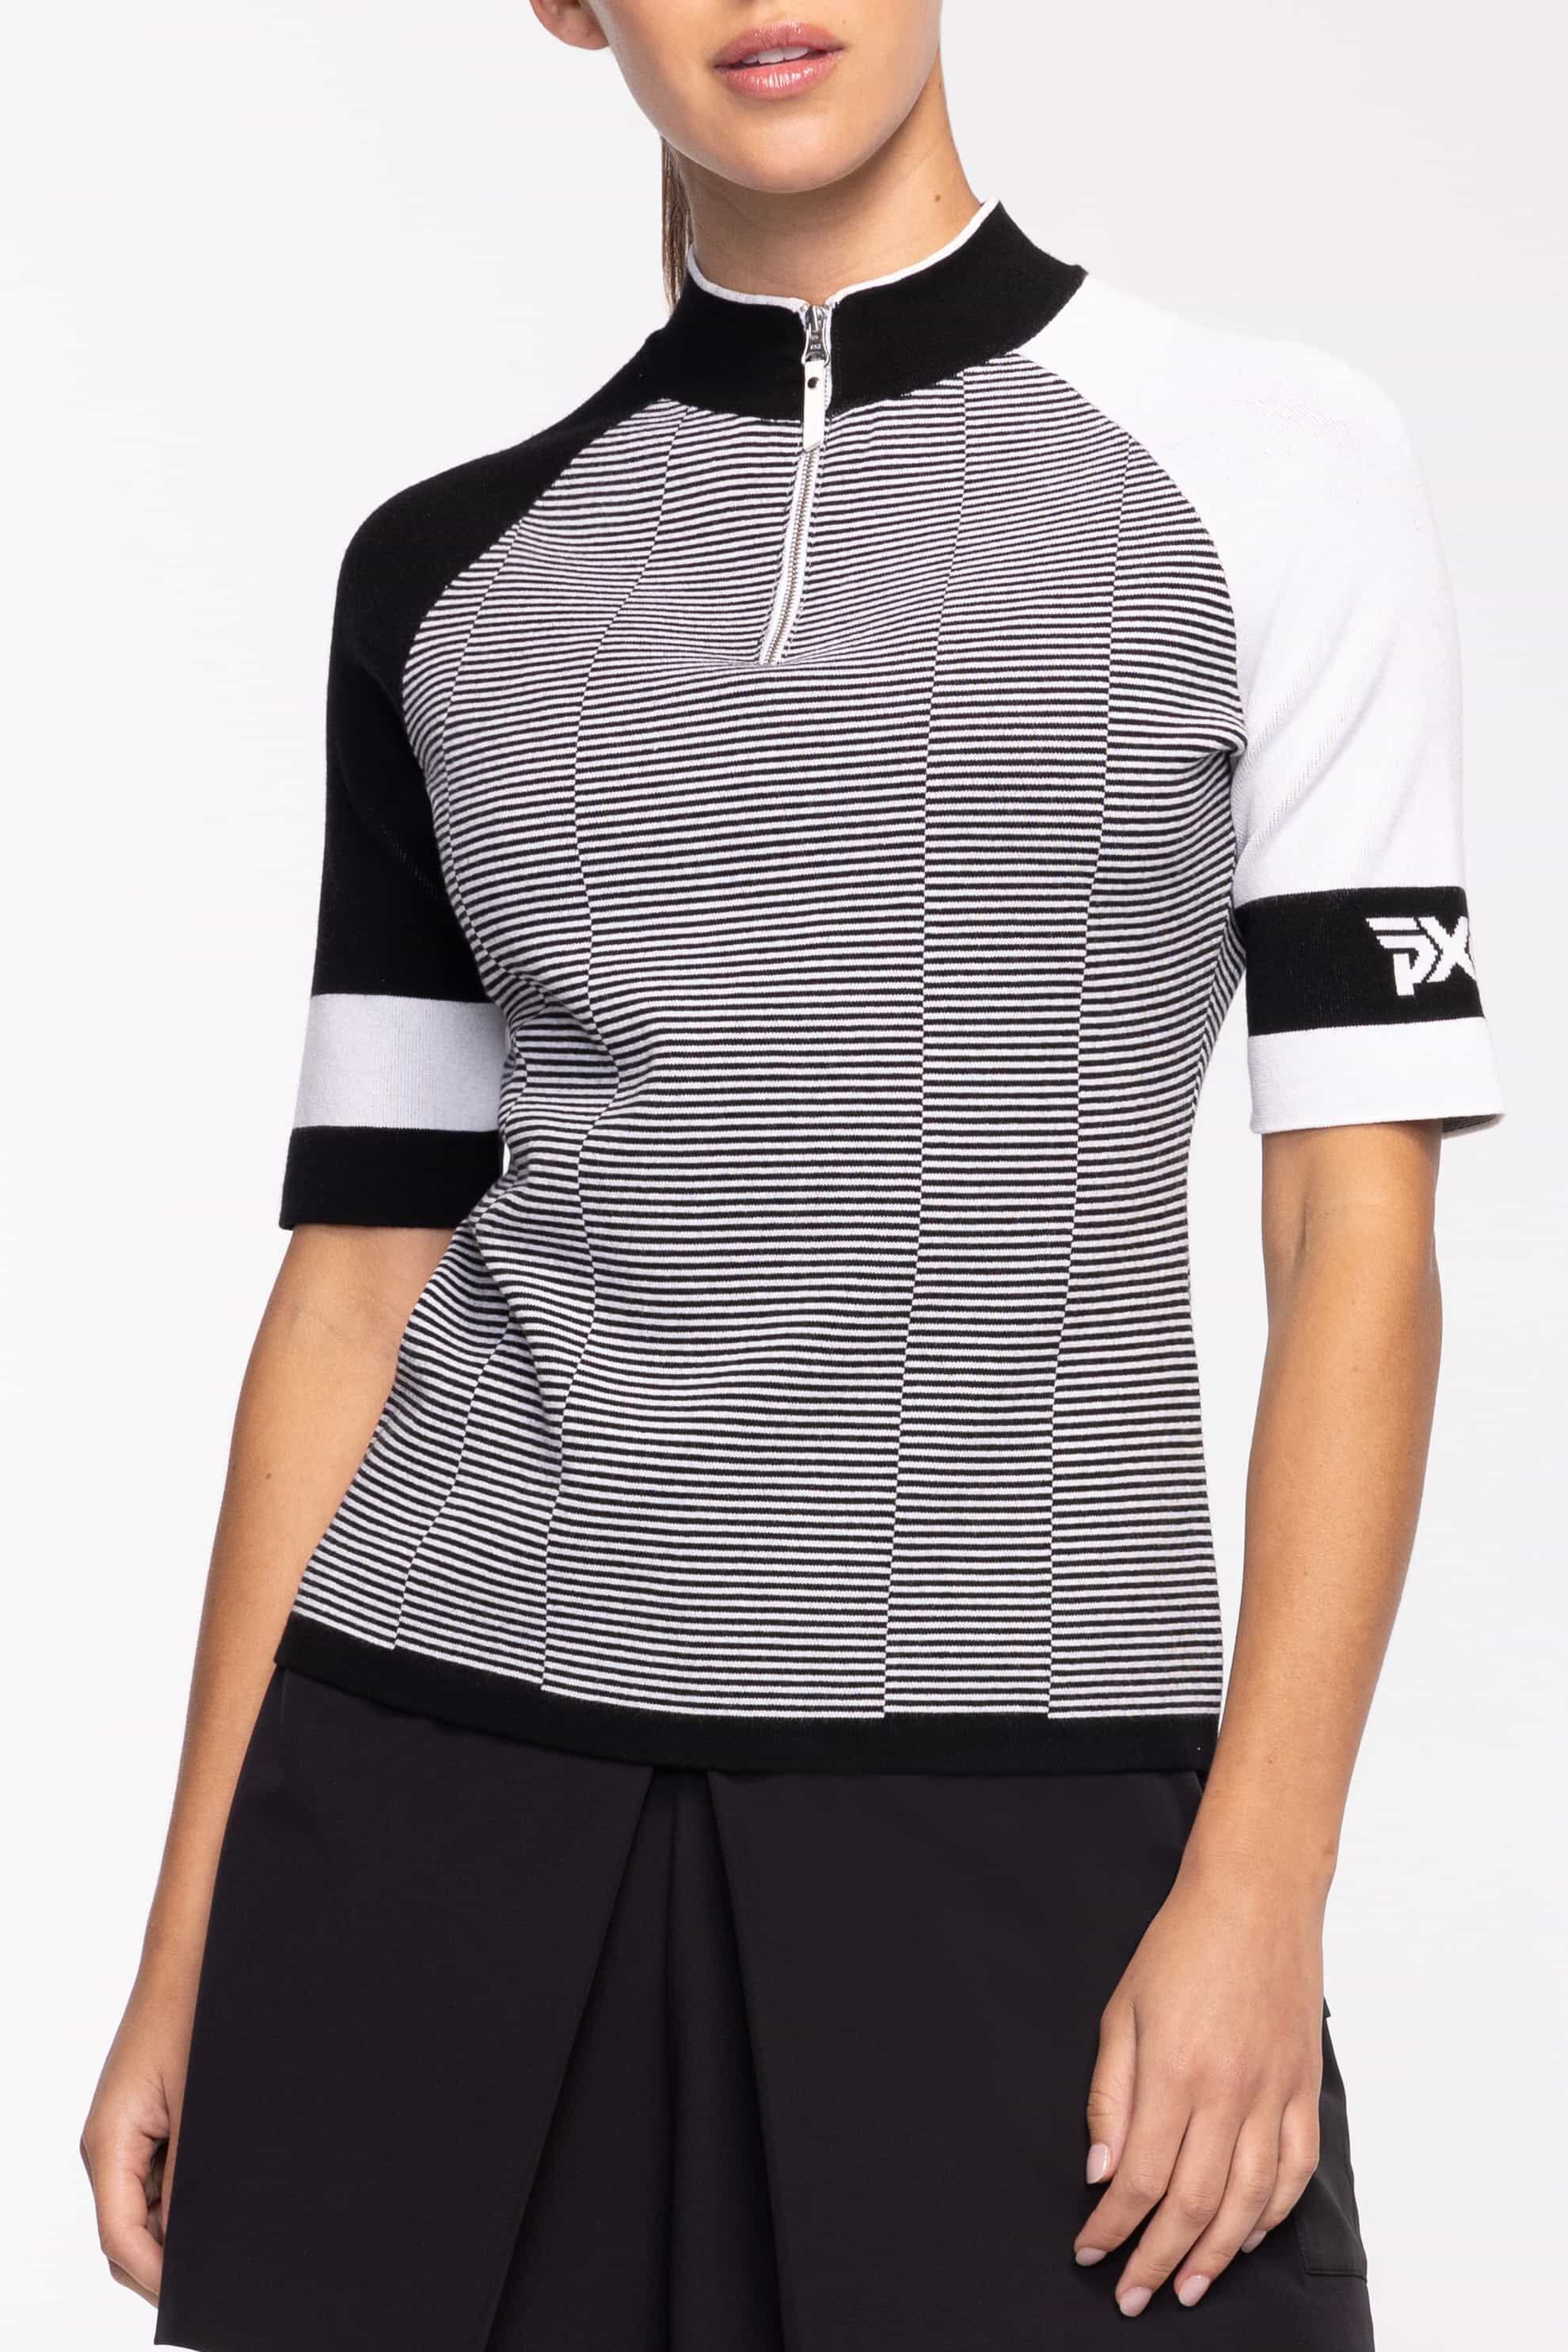 Shop Women's Golf Clothes and Apparel - Online or In-Store | PXG JP